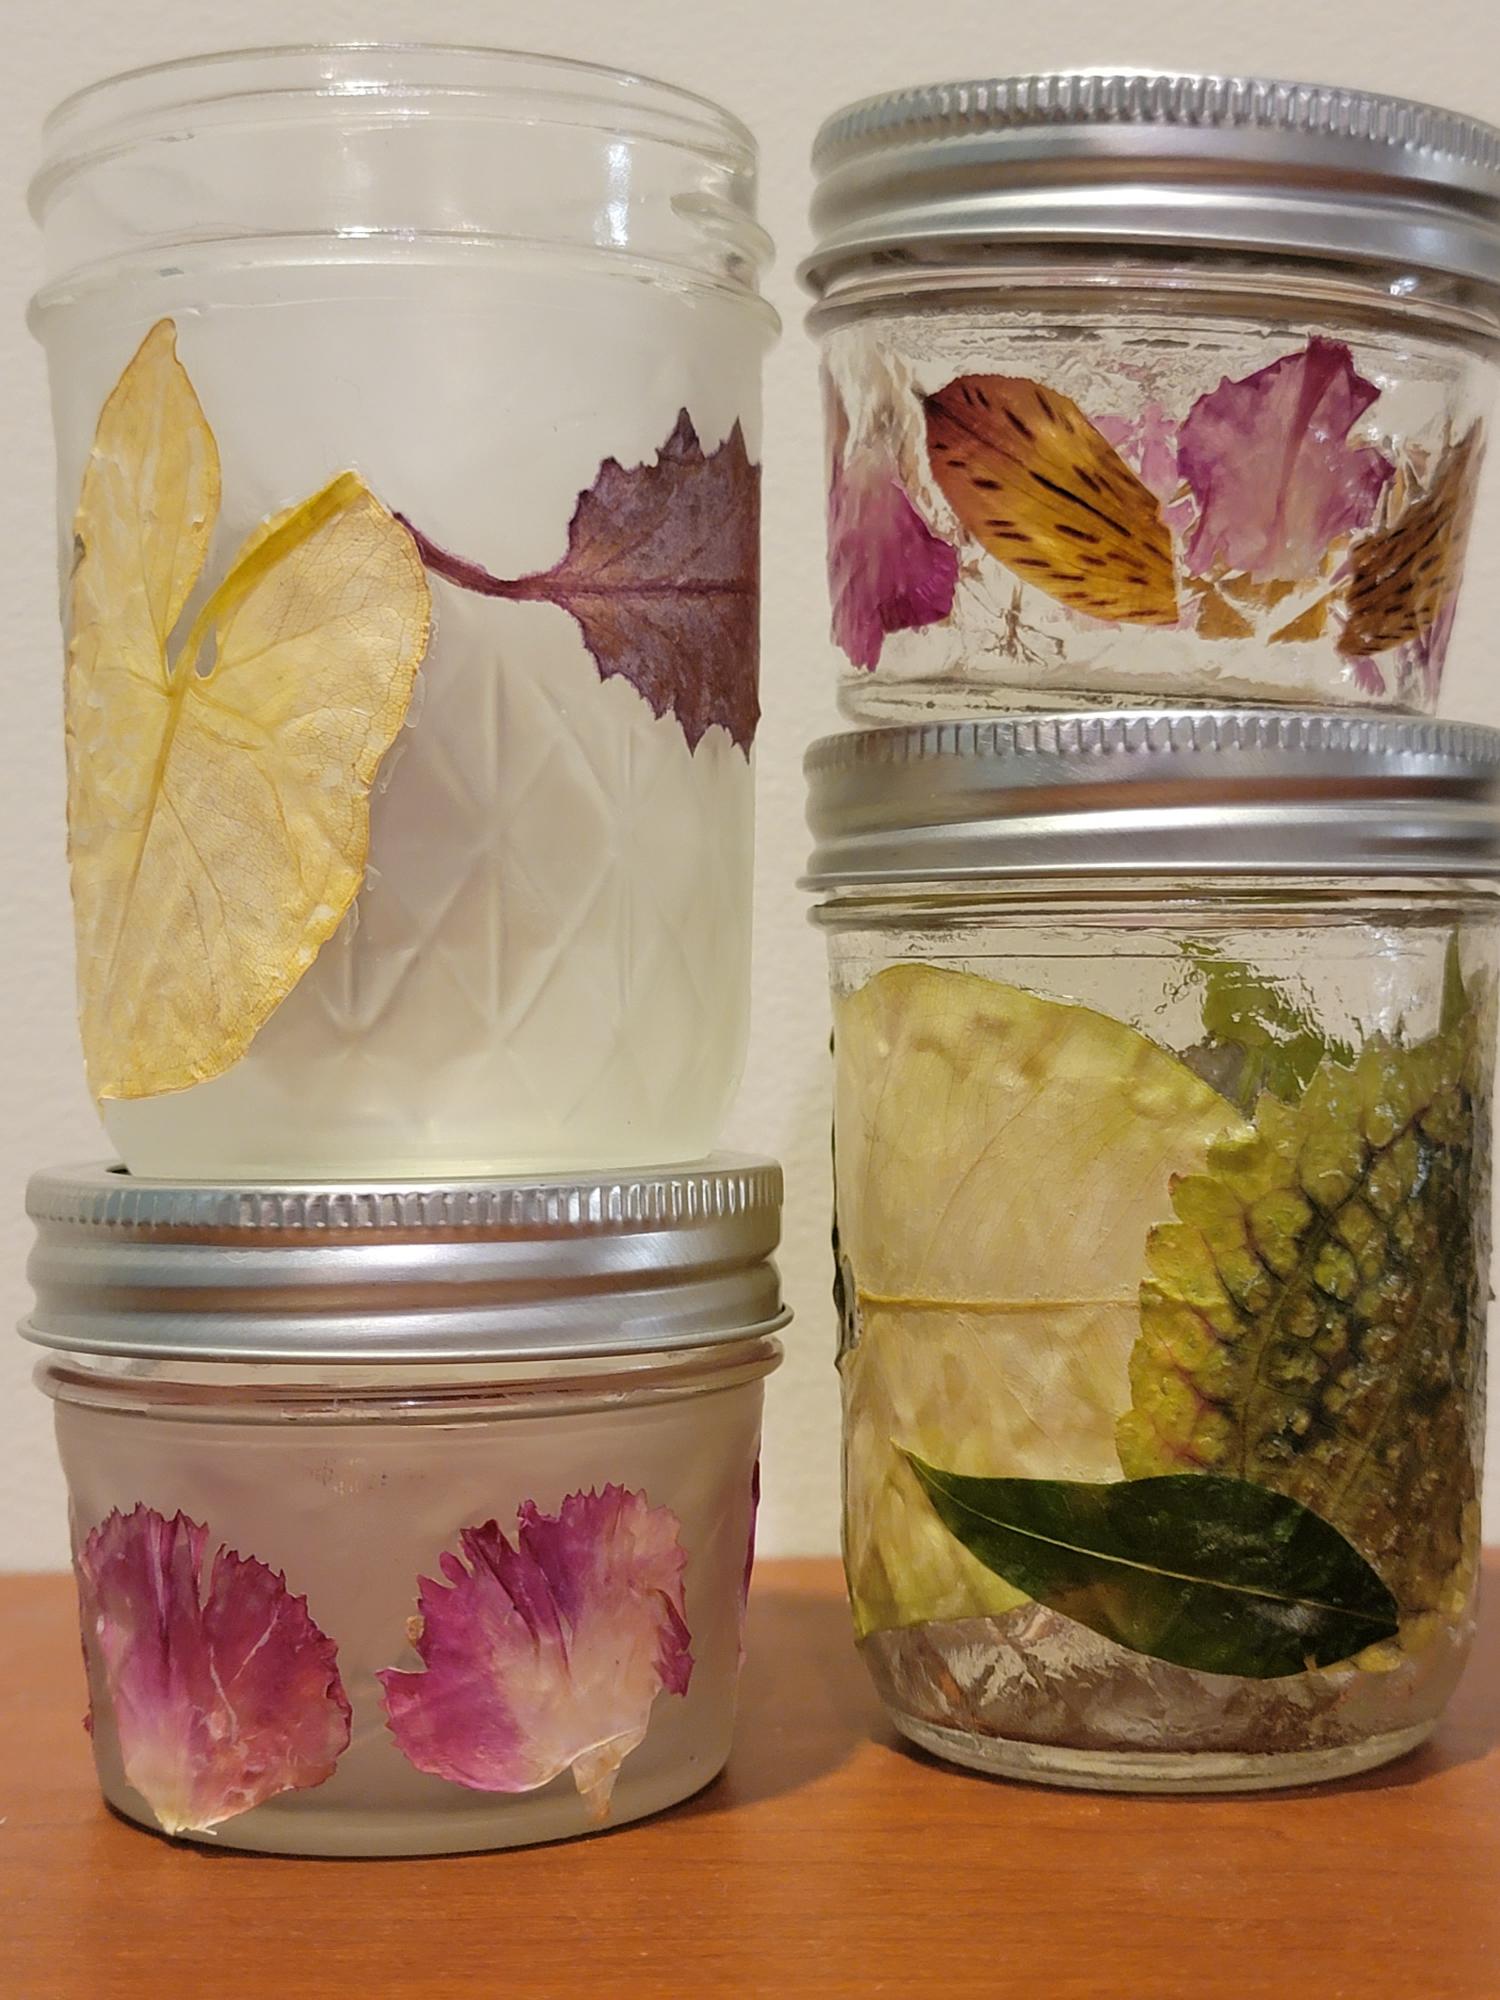 4 jars with leaves and flower petals on them